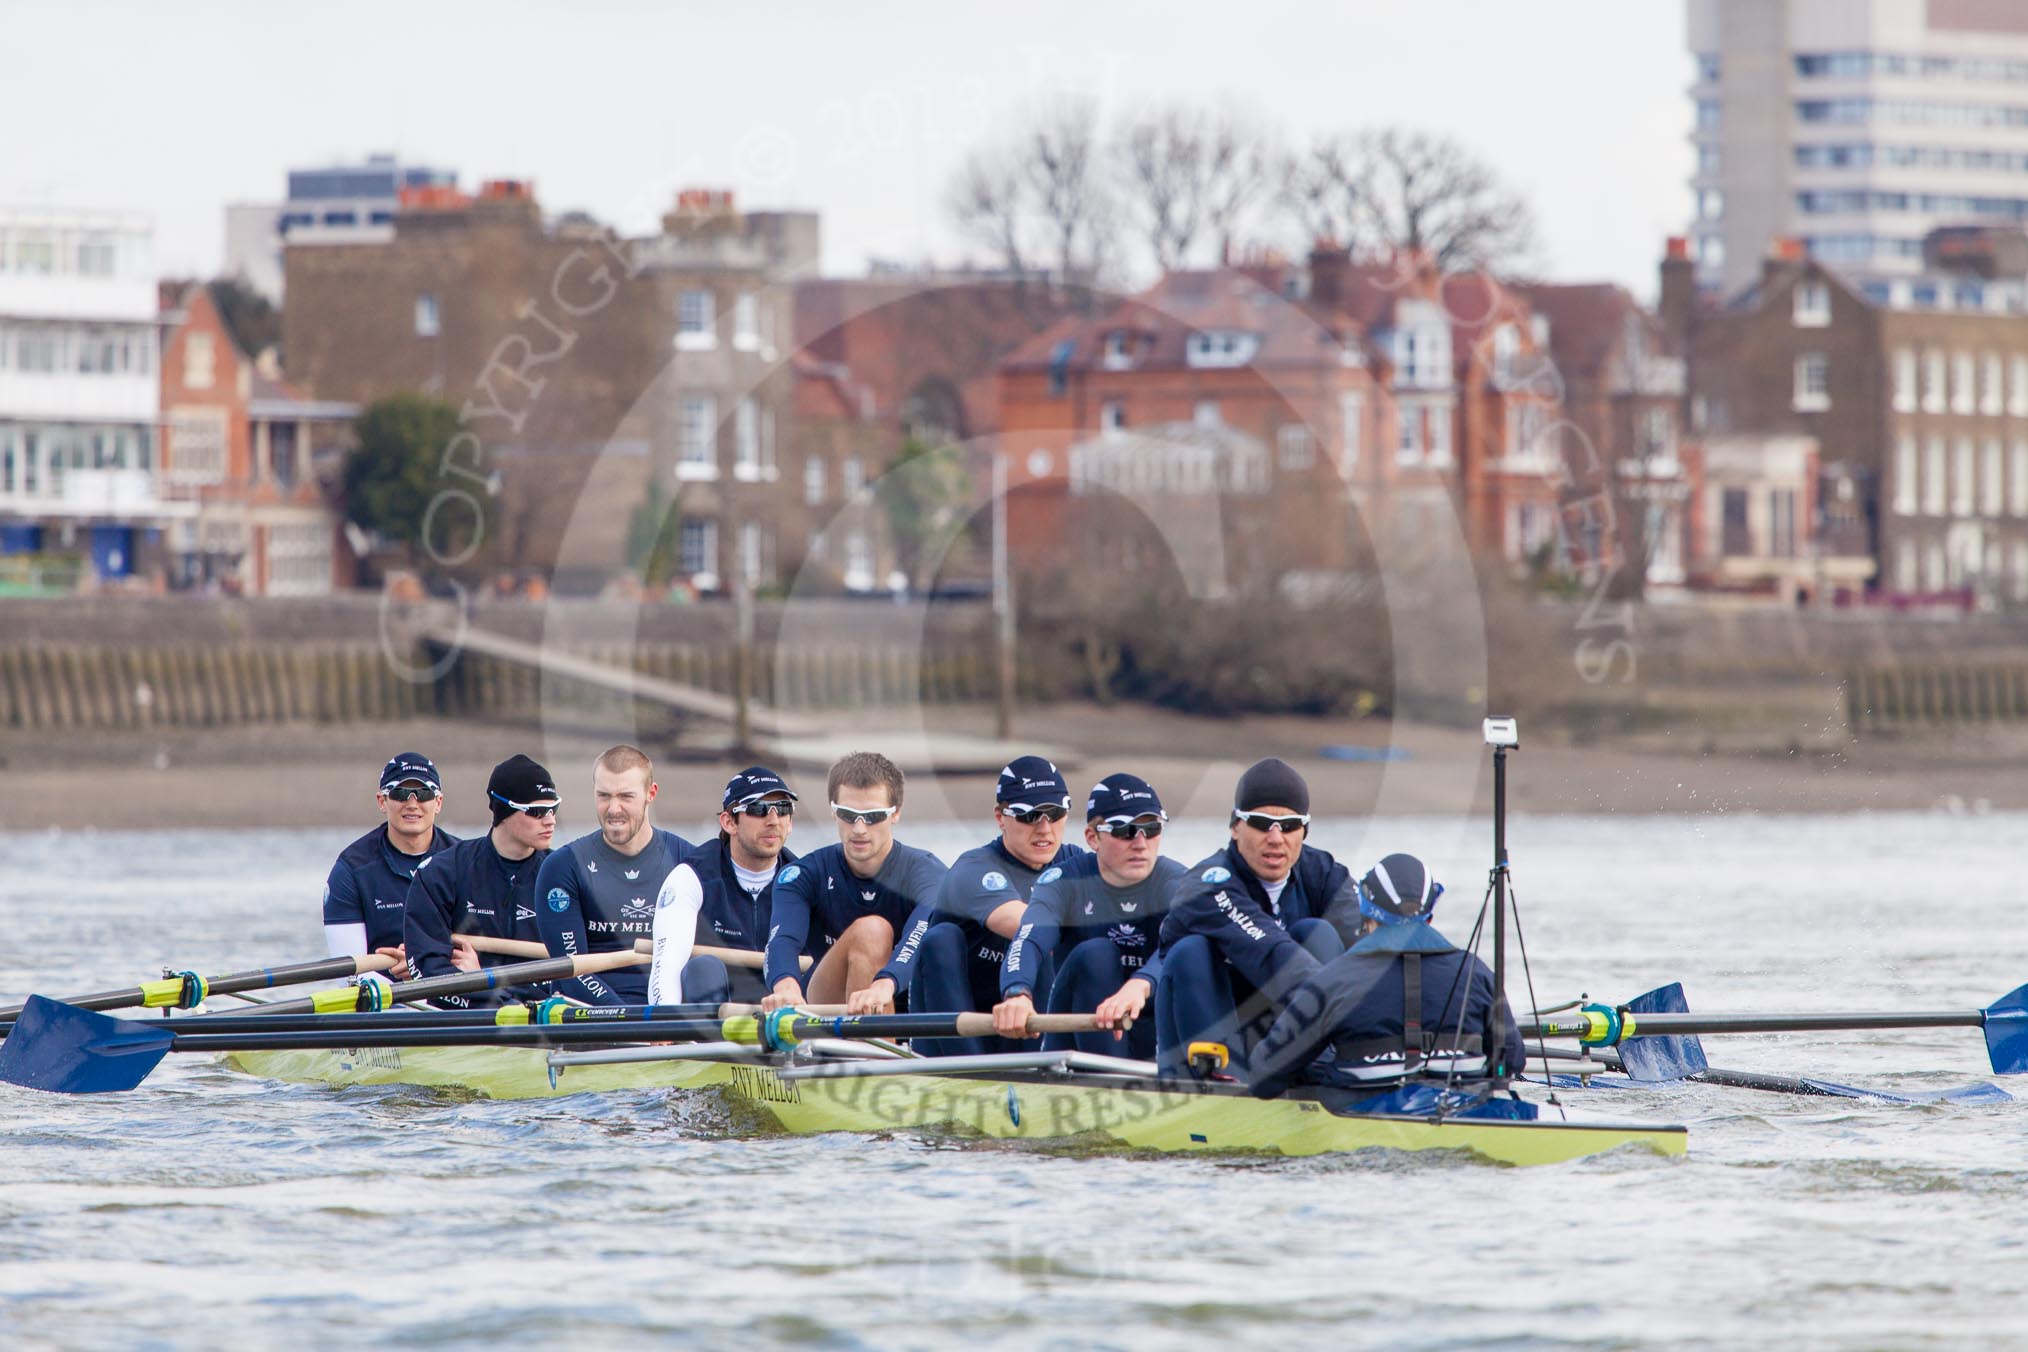 The Boat Race season 2013 -  Tideway Week (Friday) and press conferences.
River Thames,
London SW15,

United Kingdom,
on 29 March 2013 at 11:14, image #83